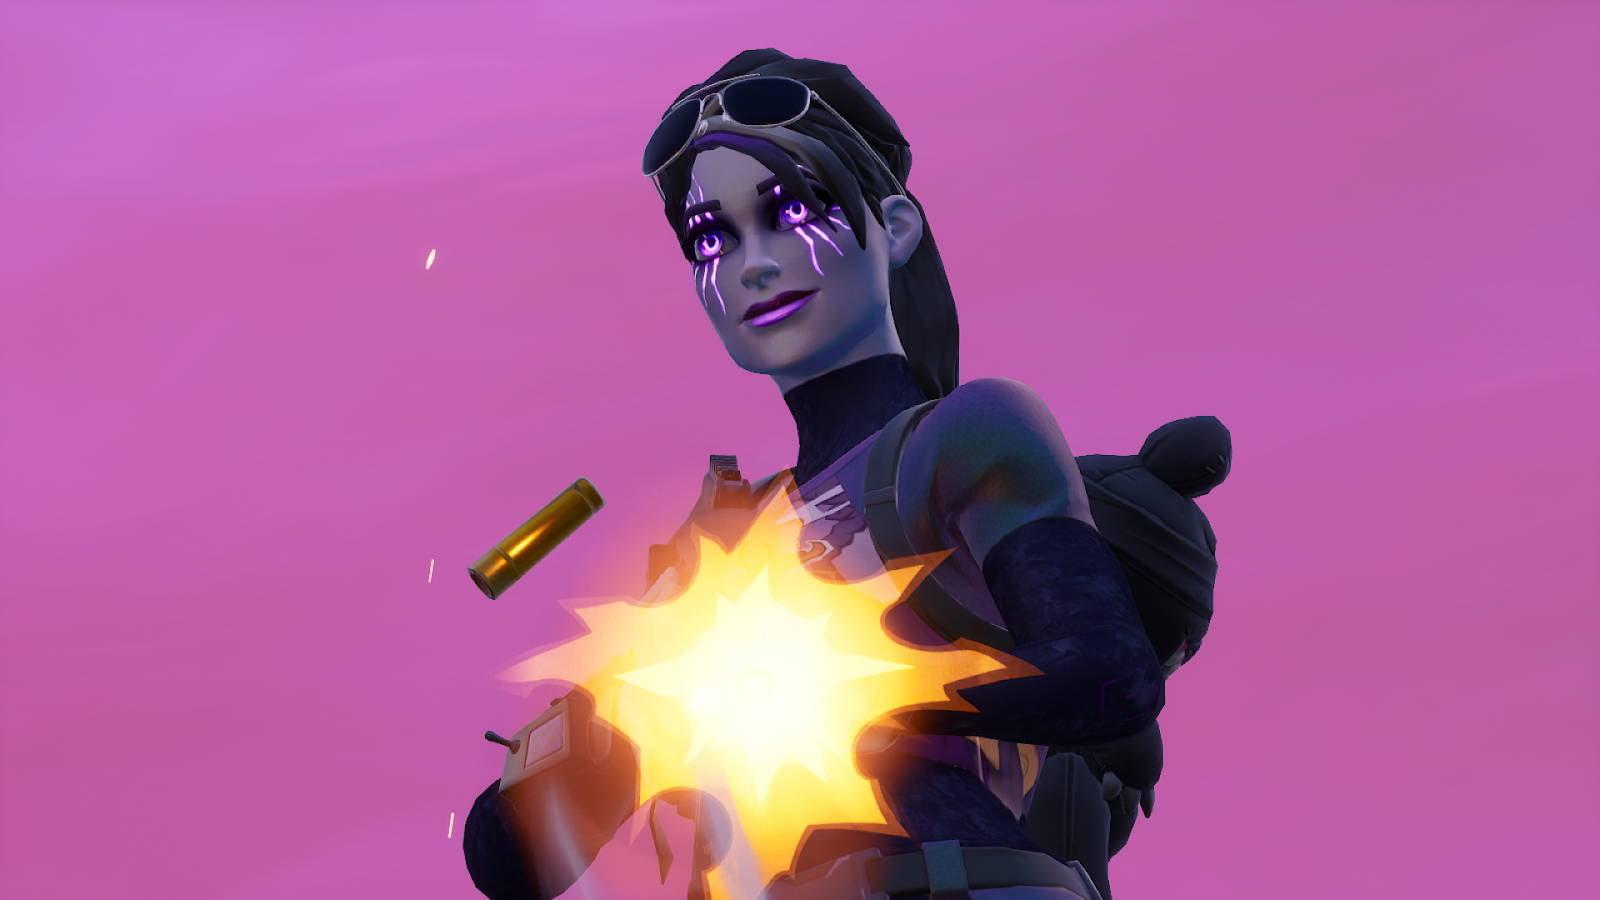 Of The Prettiest Fortnite Skins In The Game Right Now. Nerdy